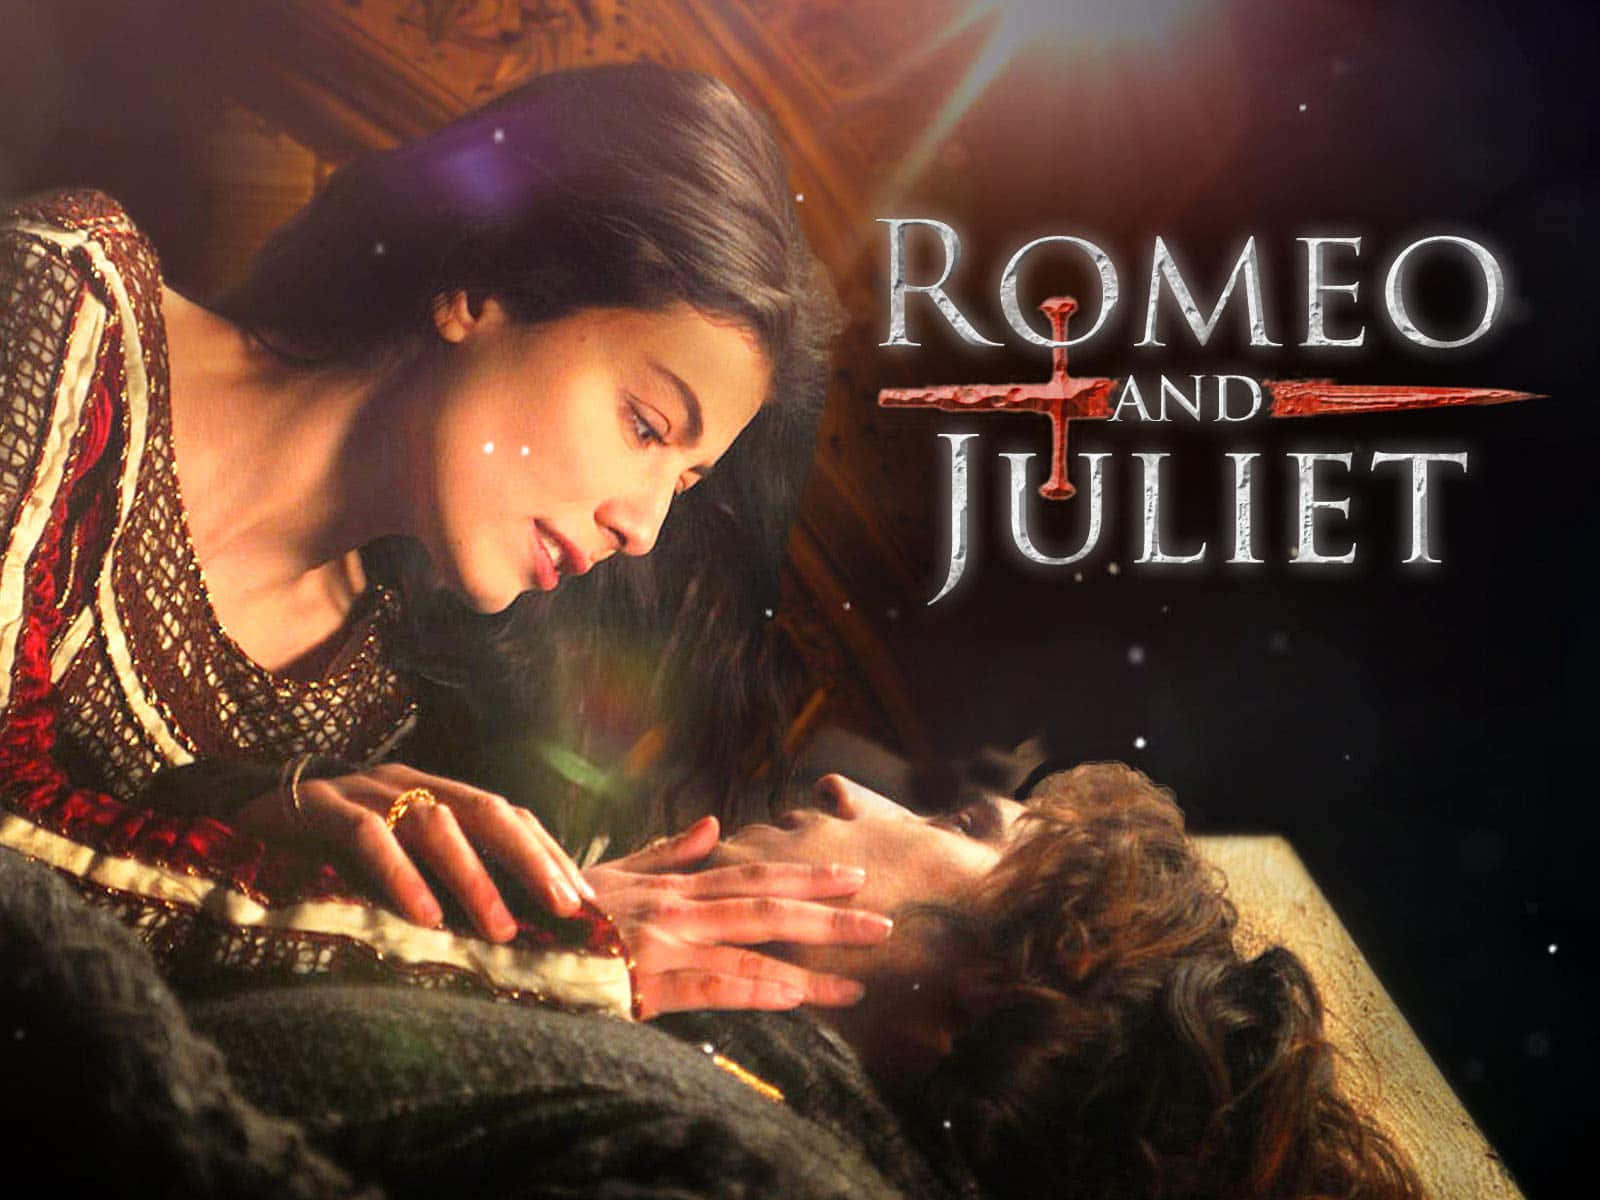 "Romeo and Juliet forever in love"